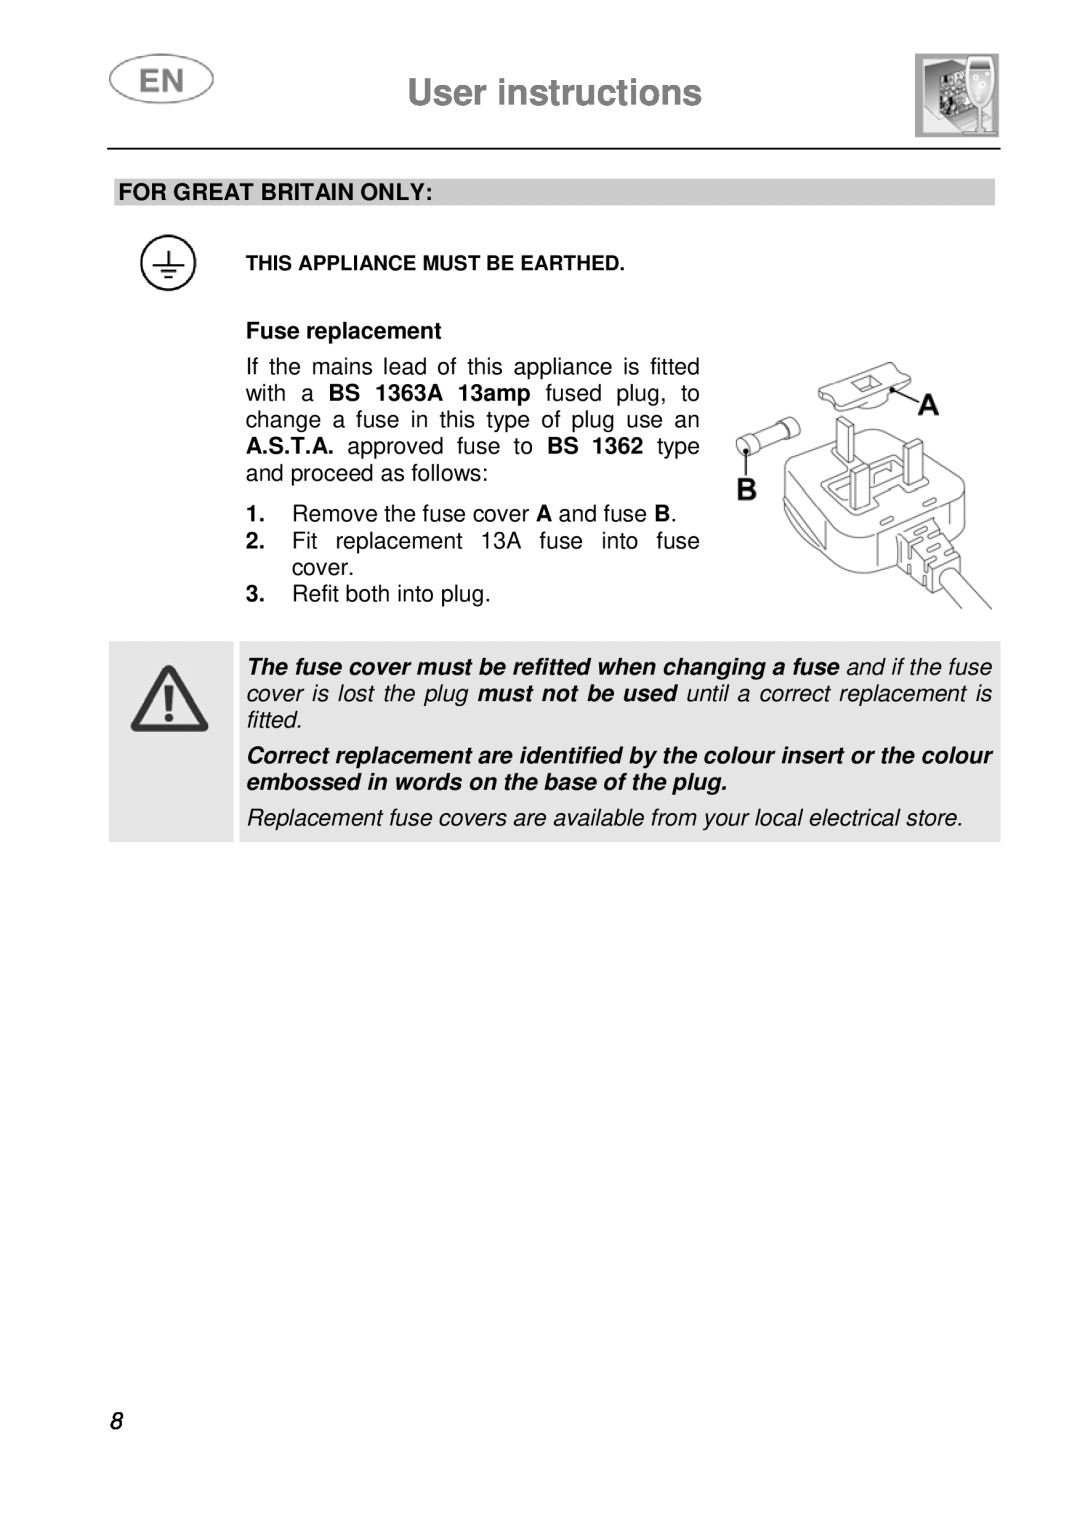 CDA WC460 manual User instructions, For Great Britain Only, Fuse replacement 